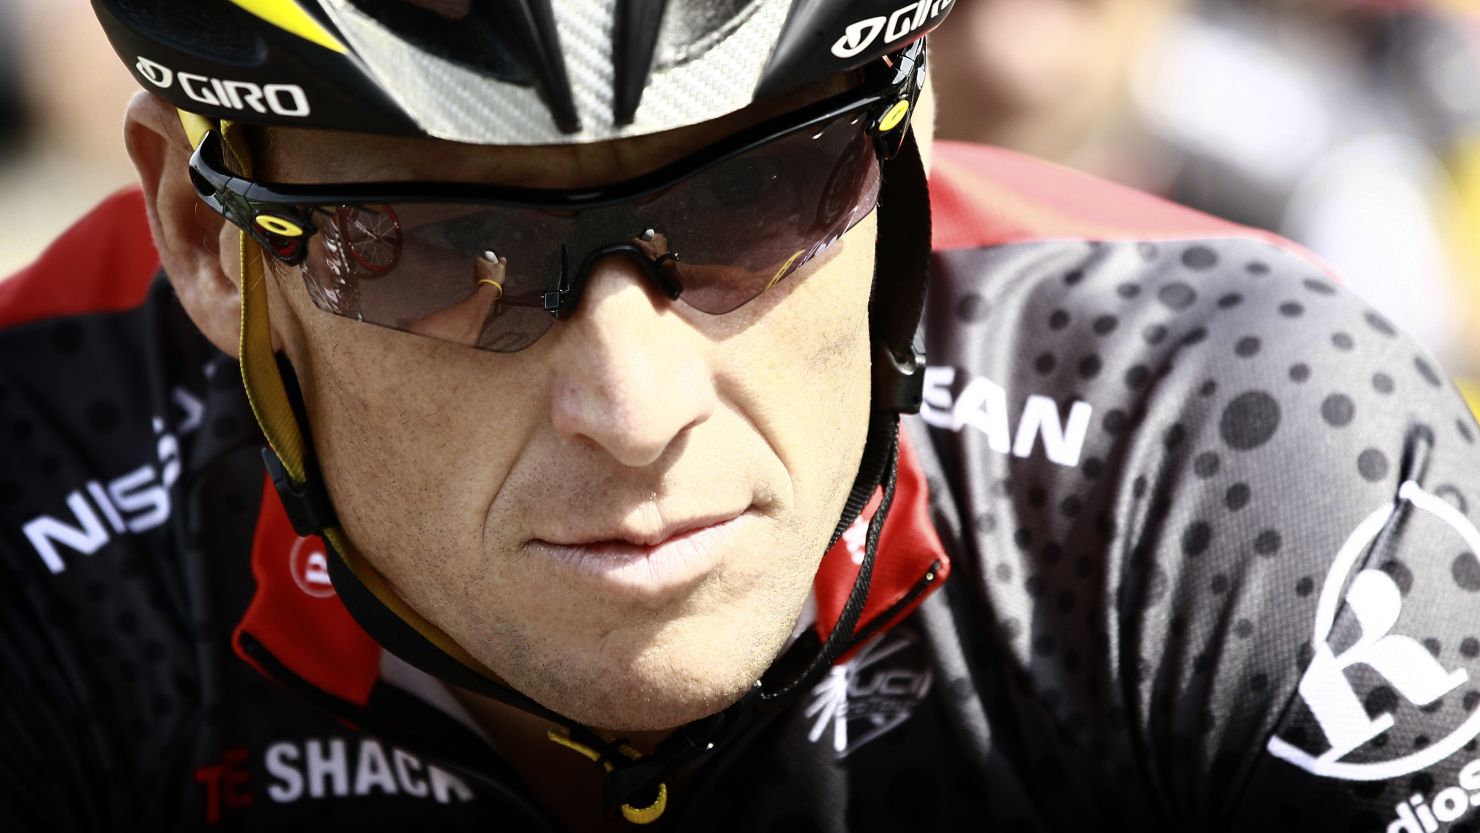 Lance Armstrong's doping scandal has cost sponsor Oakley one of its biggest public relations assets.